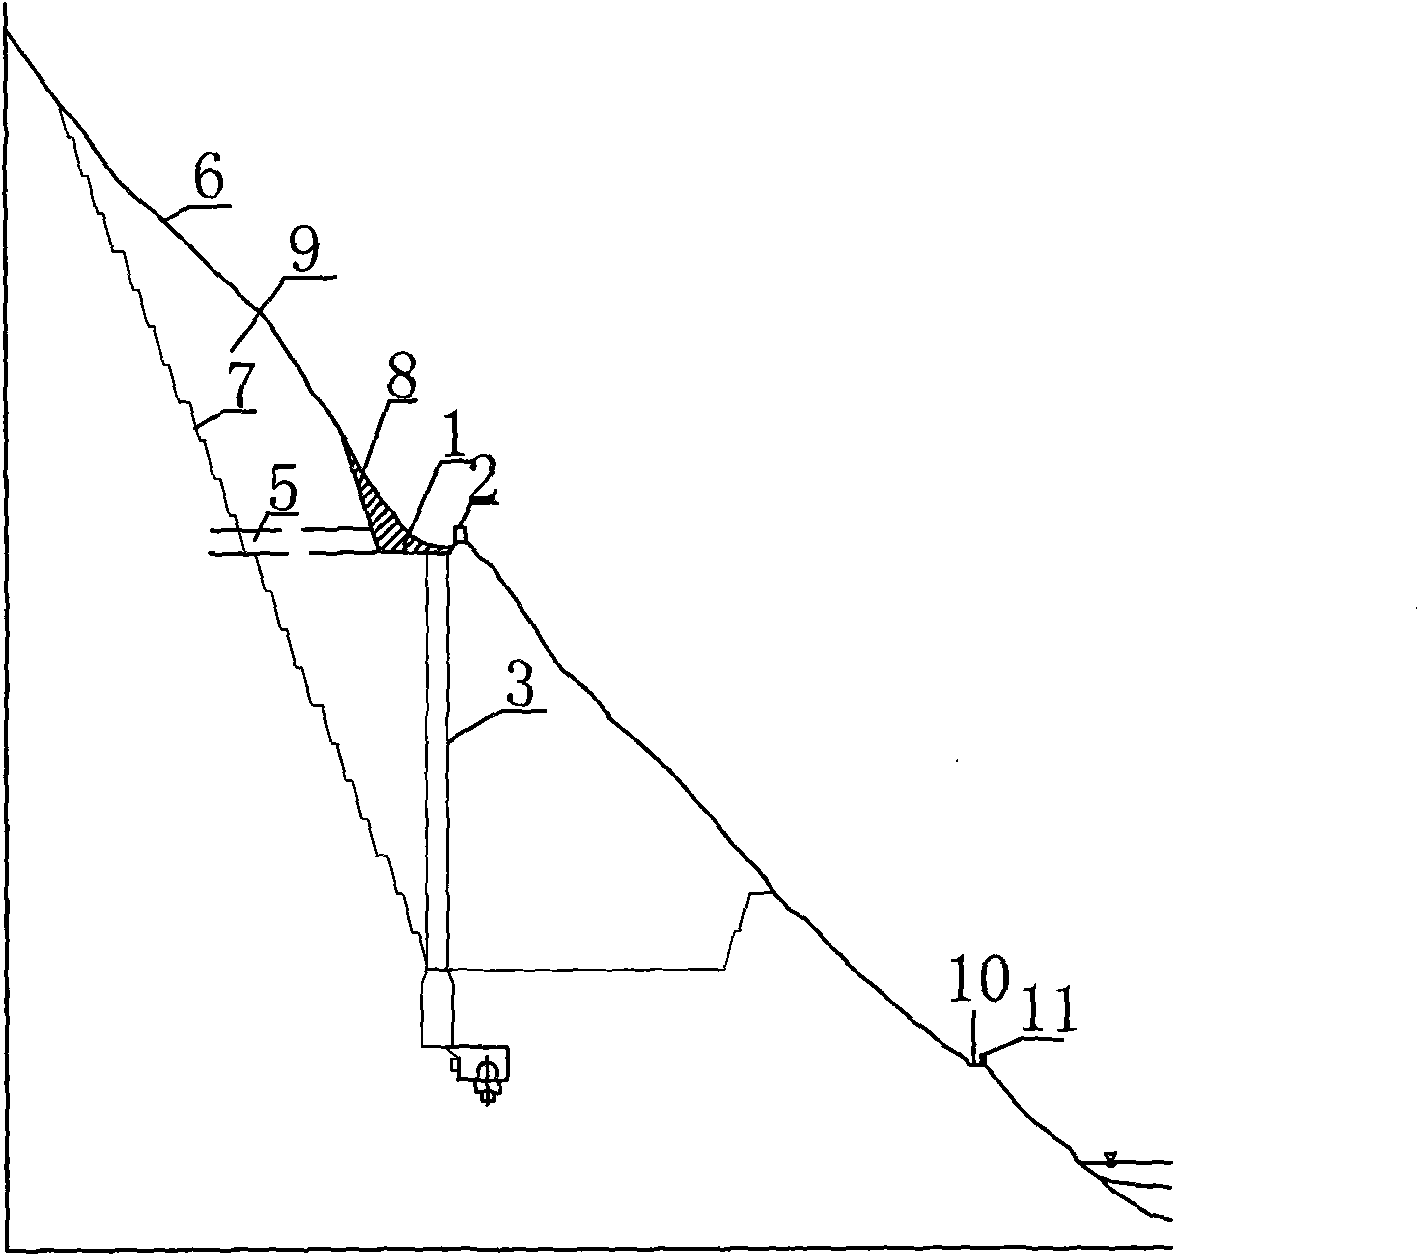 Space-time conversion exploitation method for high and steep rock slope stock ground near river